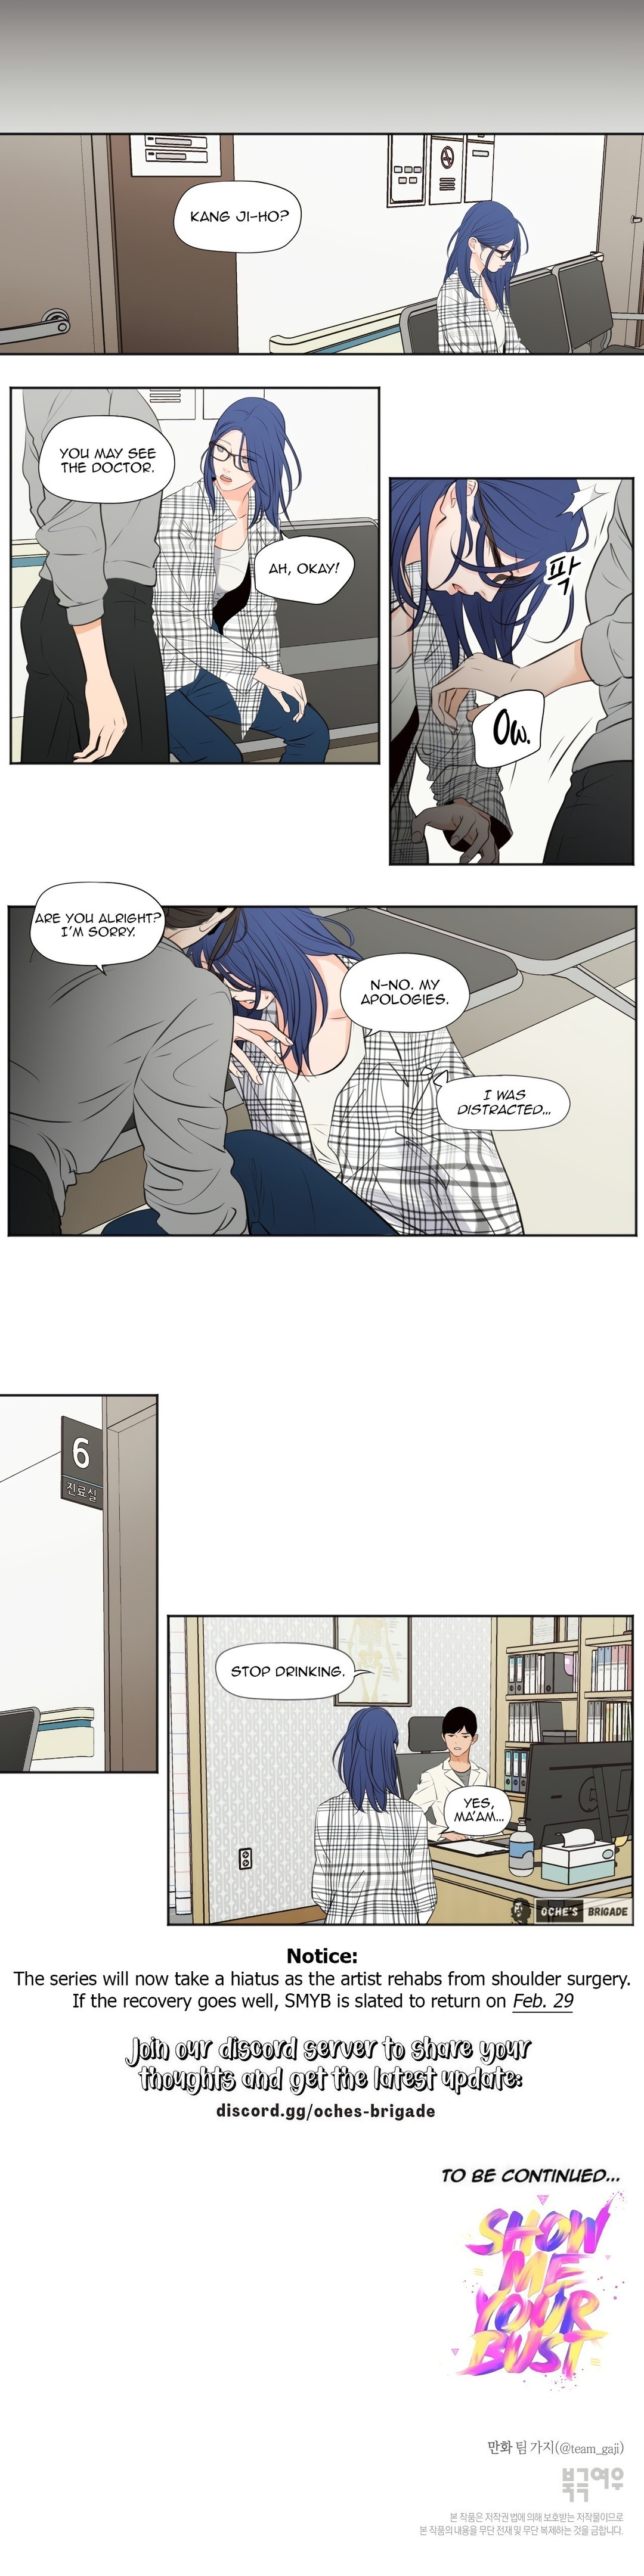 Show Me Your Bust - Chapter 41 Page 7